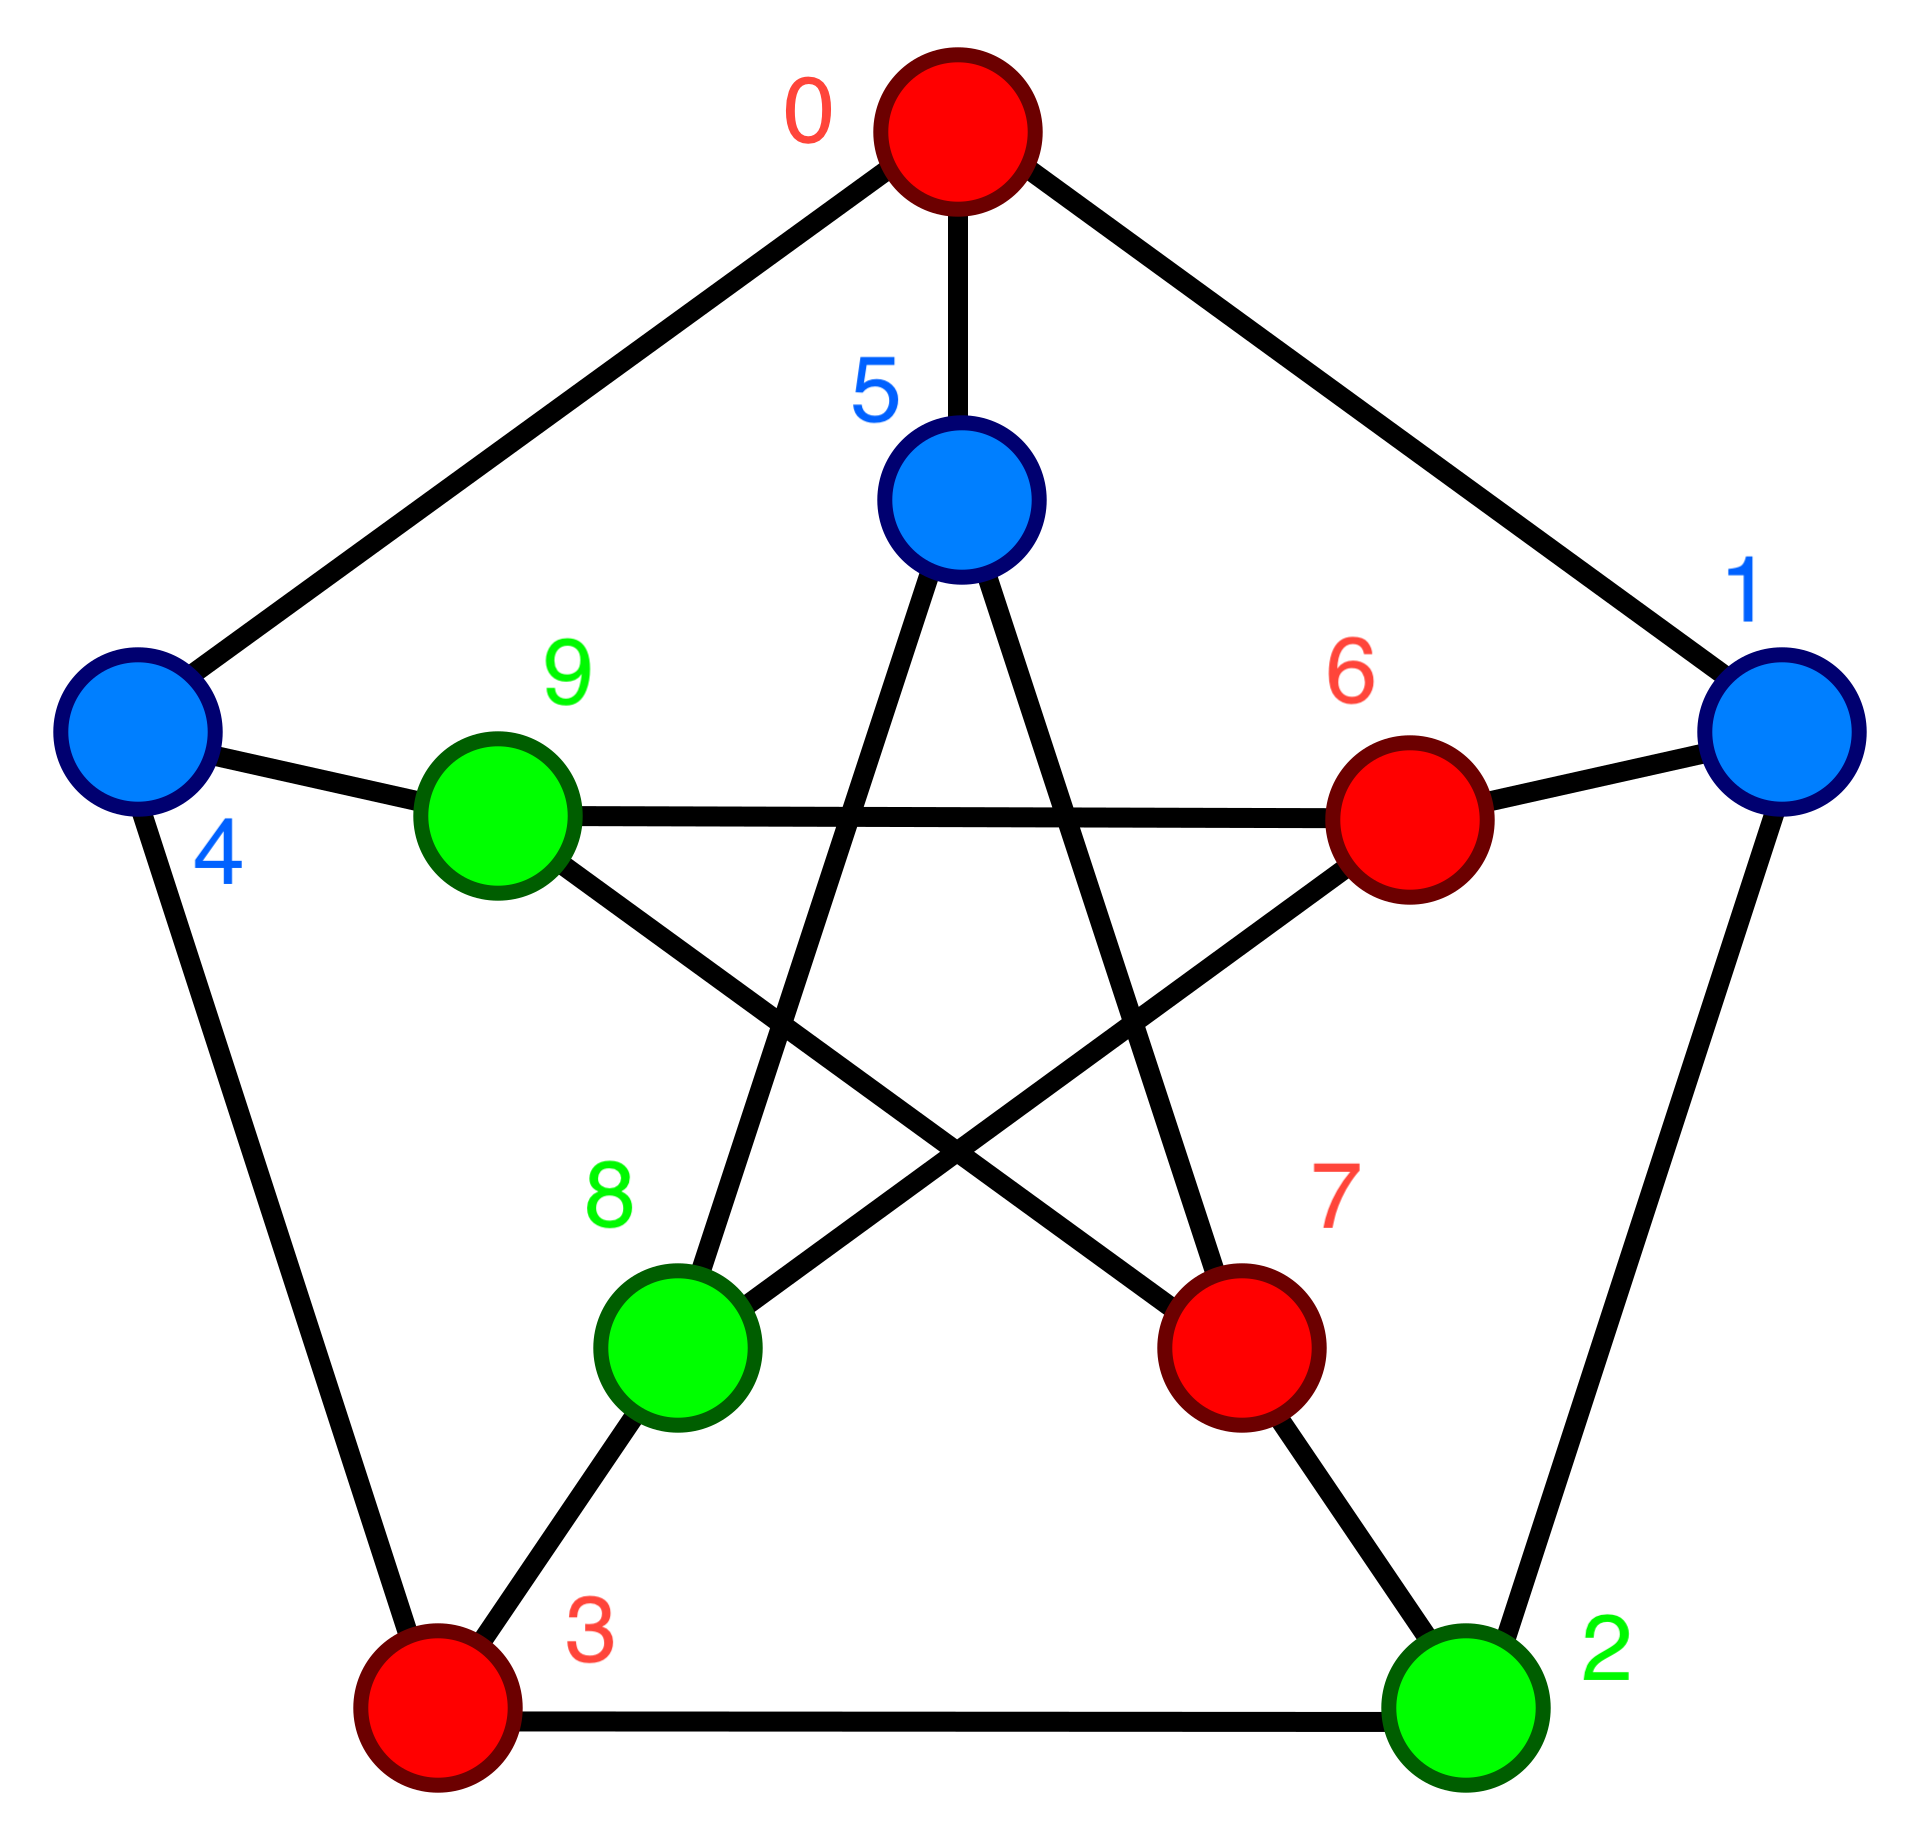 3-Coloring Labelled